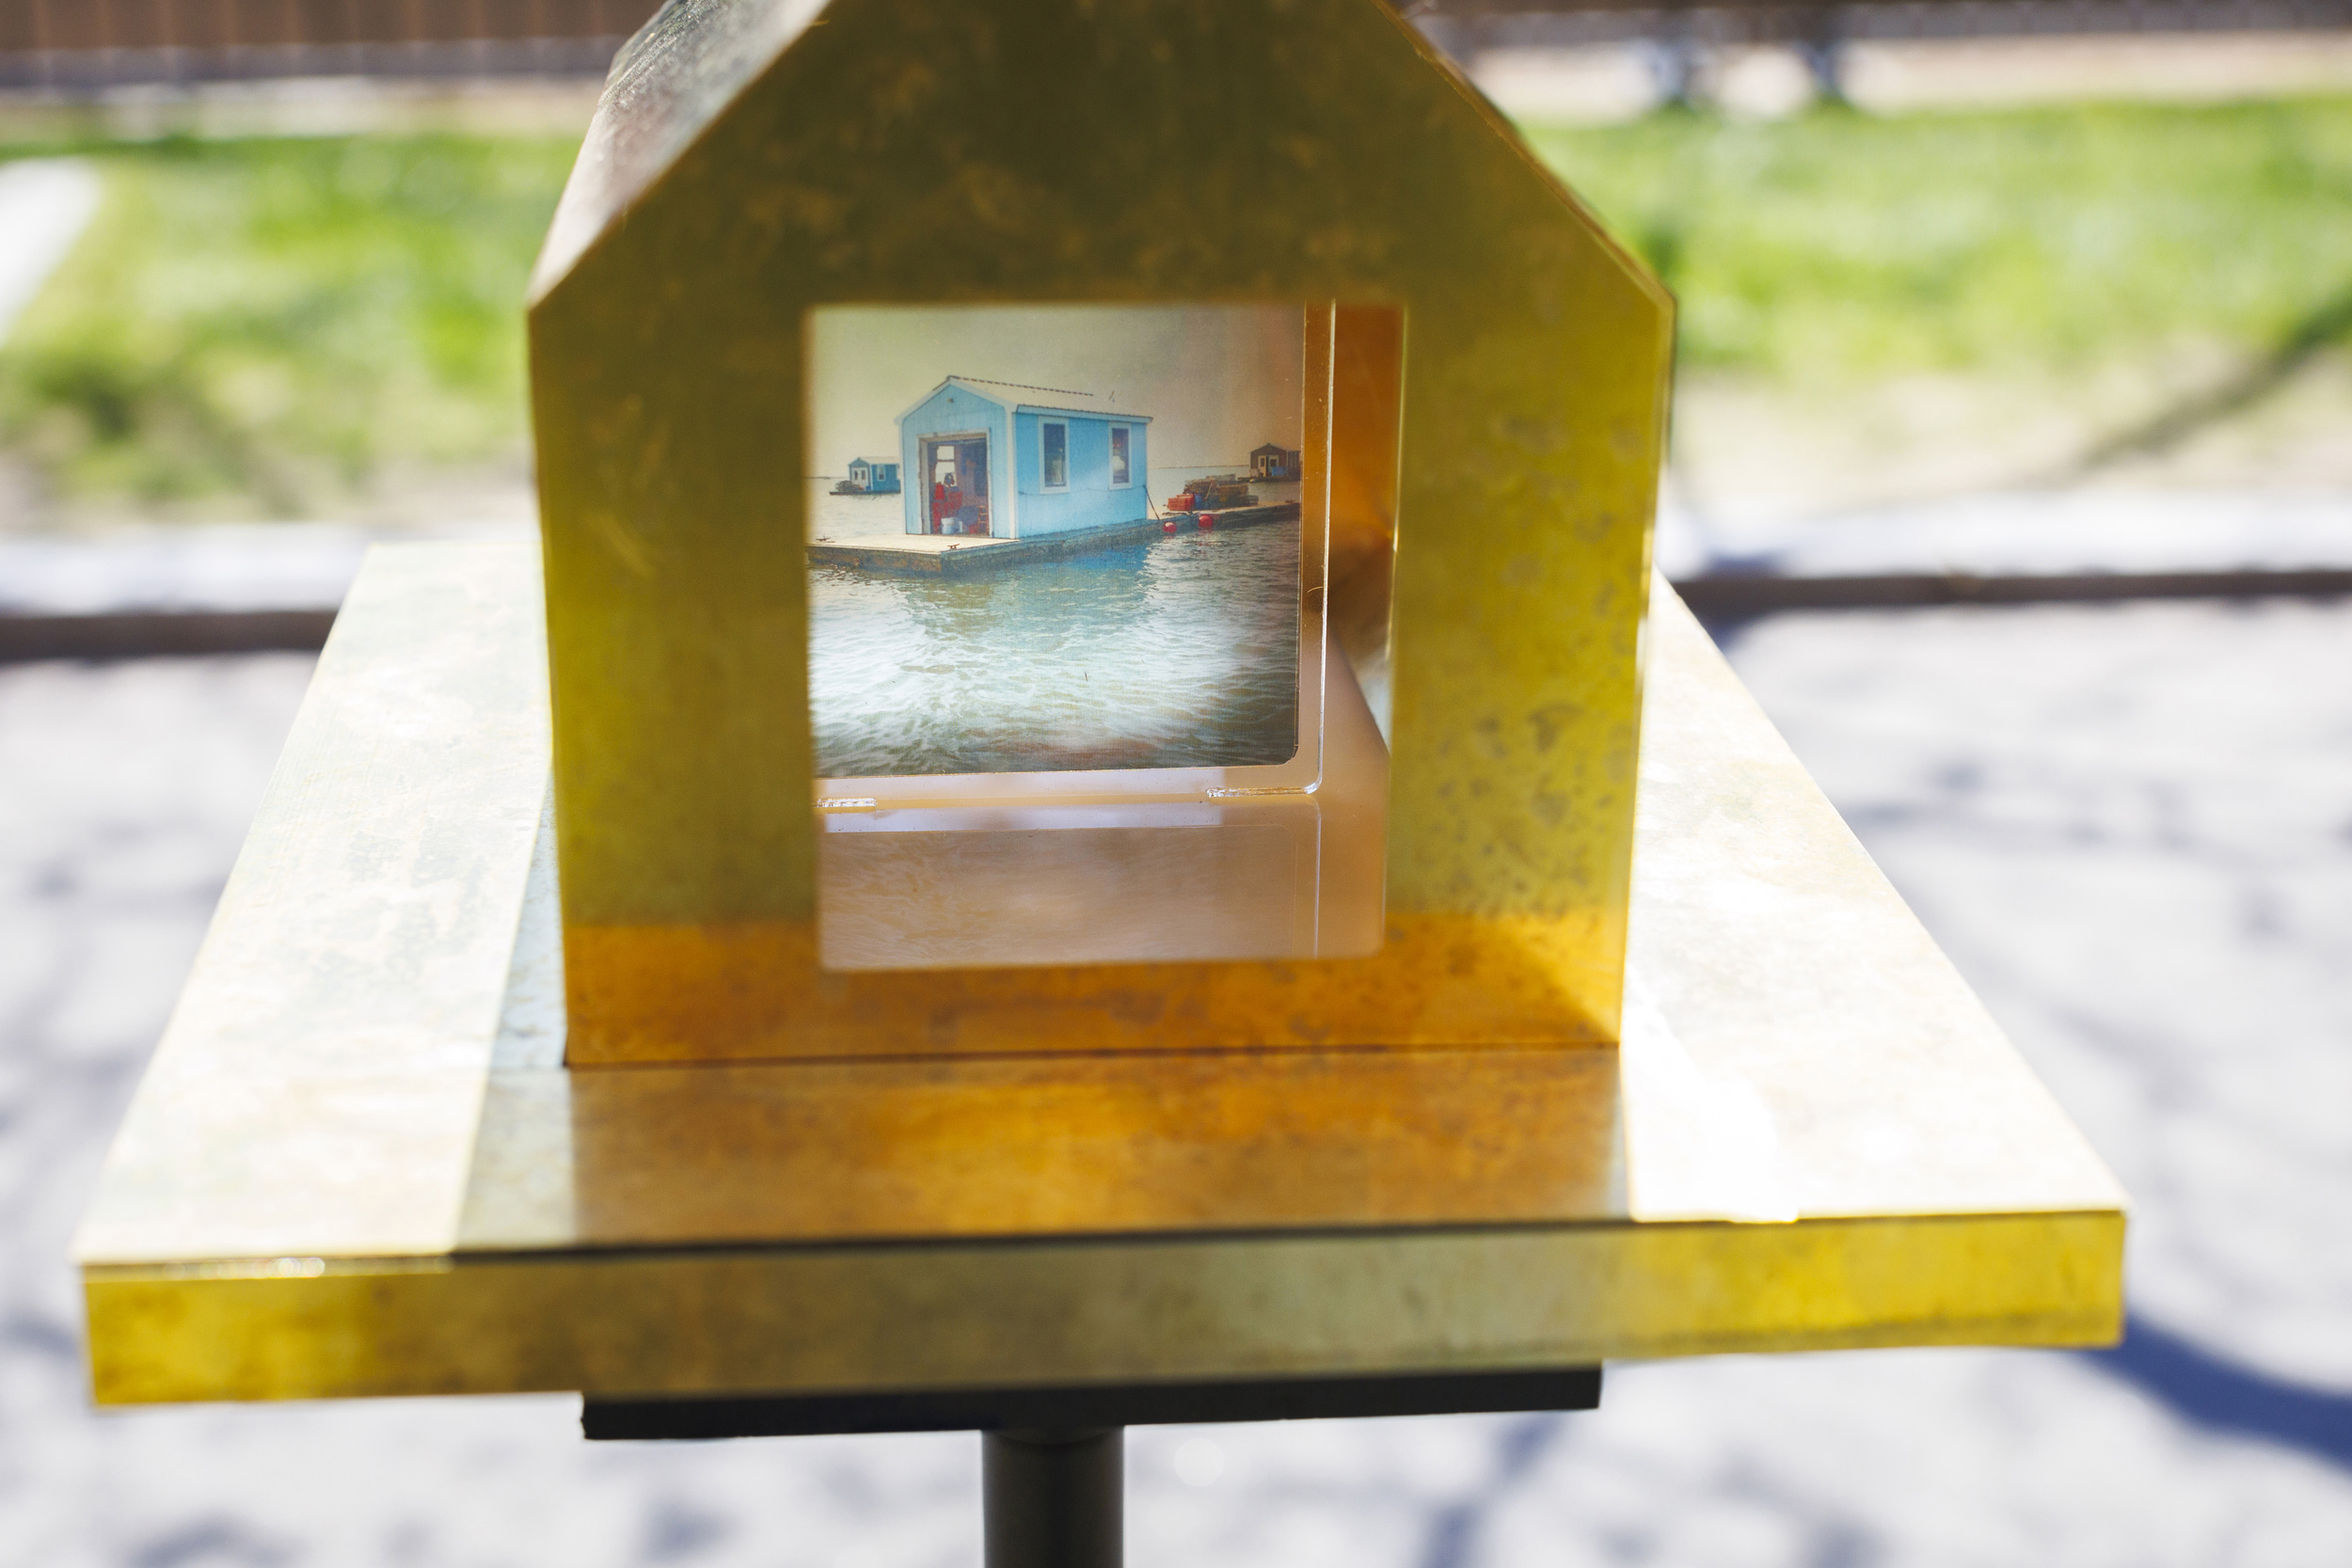 A detail image of a public art installation called “Oyster Floats, Camera Obscuras for a Floating City” by Randy Crandon GSD ’25 and Dylan Herrmann-Holt GSD ’25 is pictured alongside Memorial Hall.